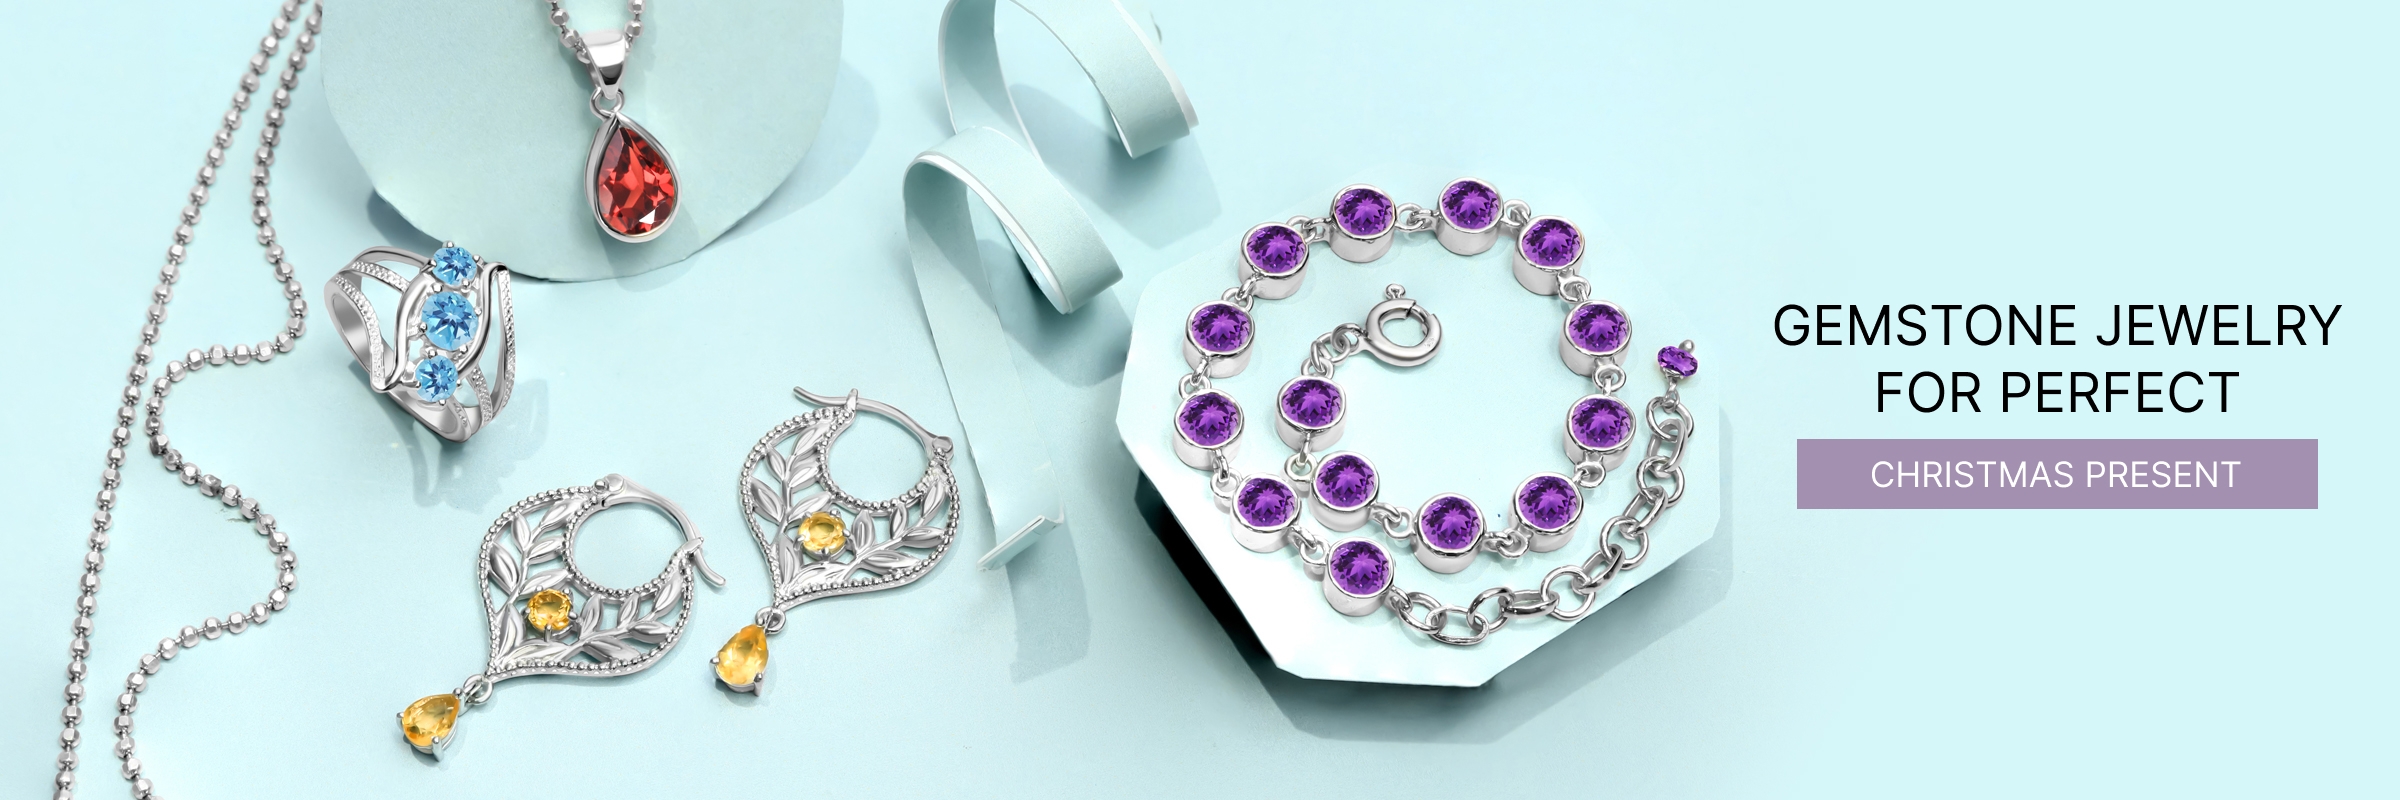 Gemstone Jewelry For Perfect Christmas Present   